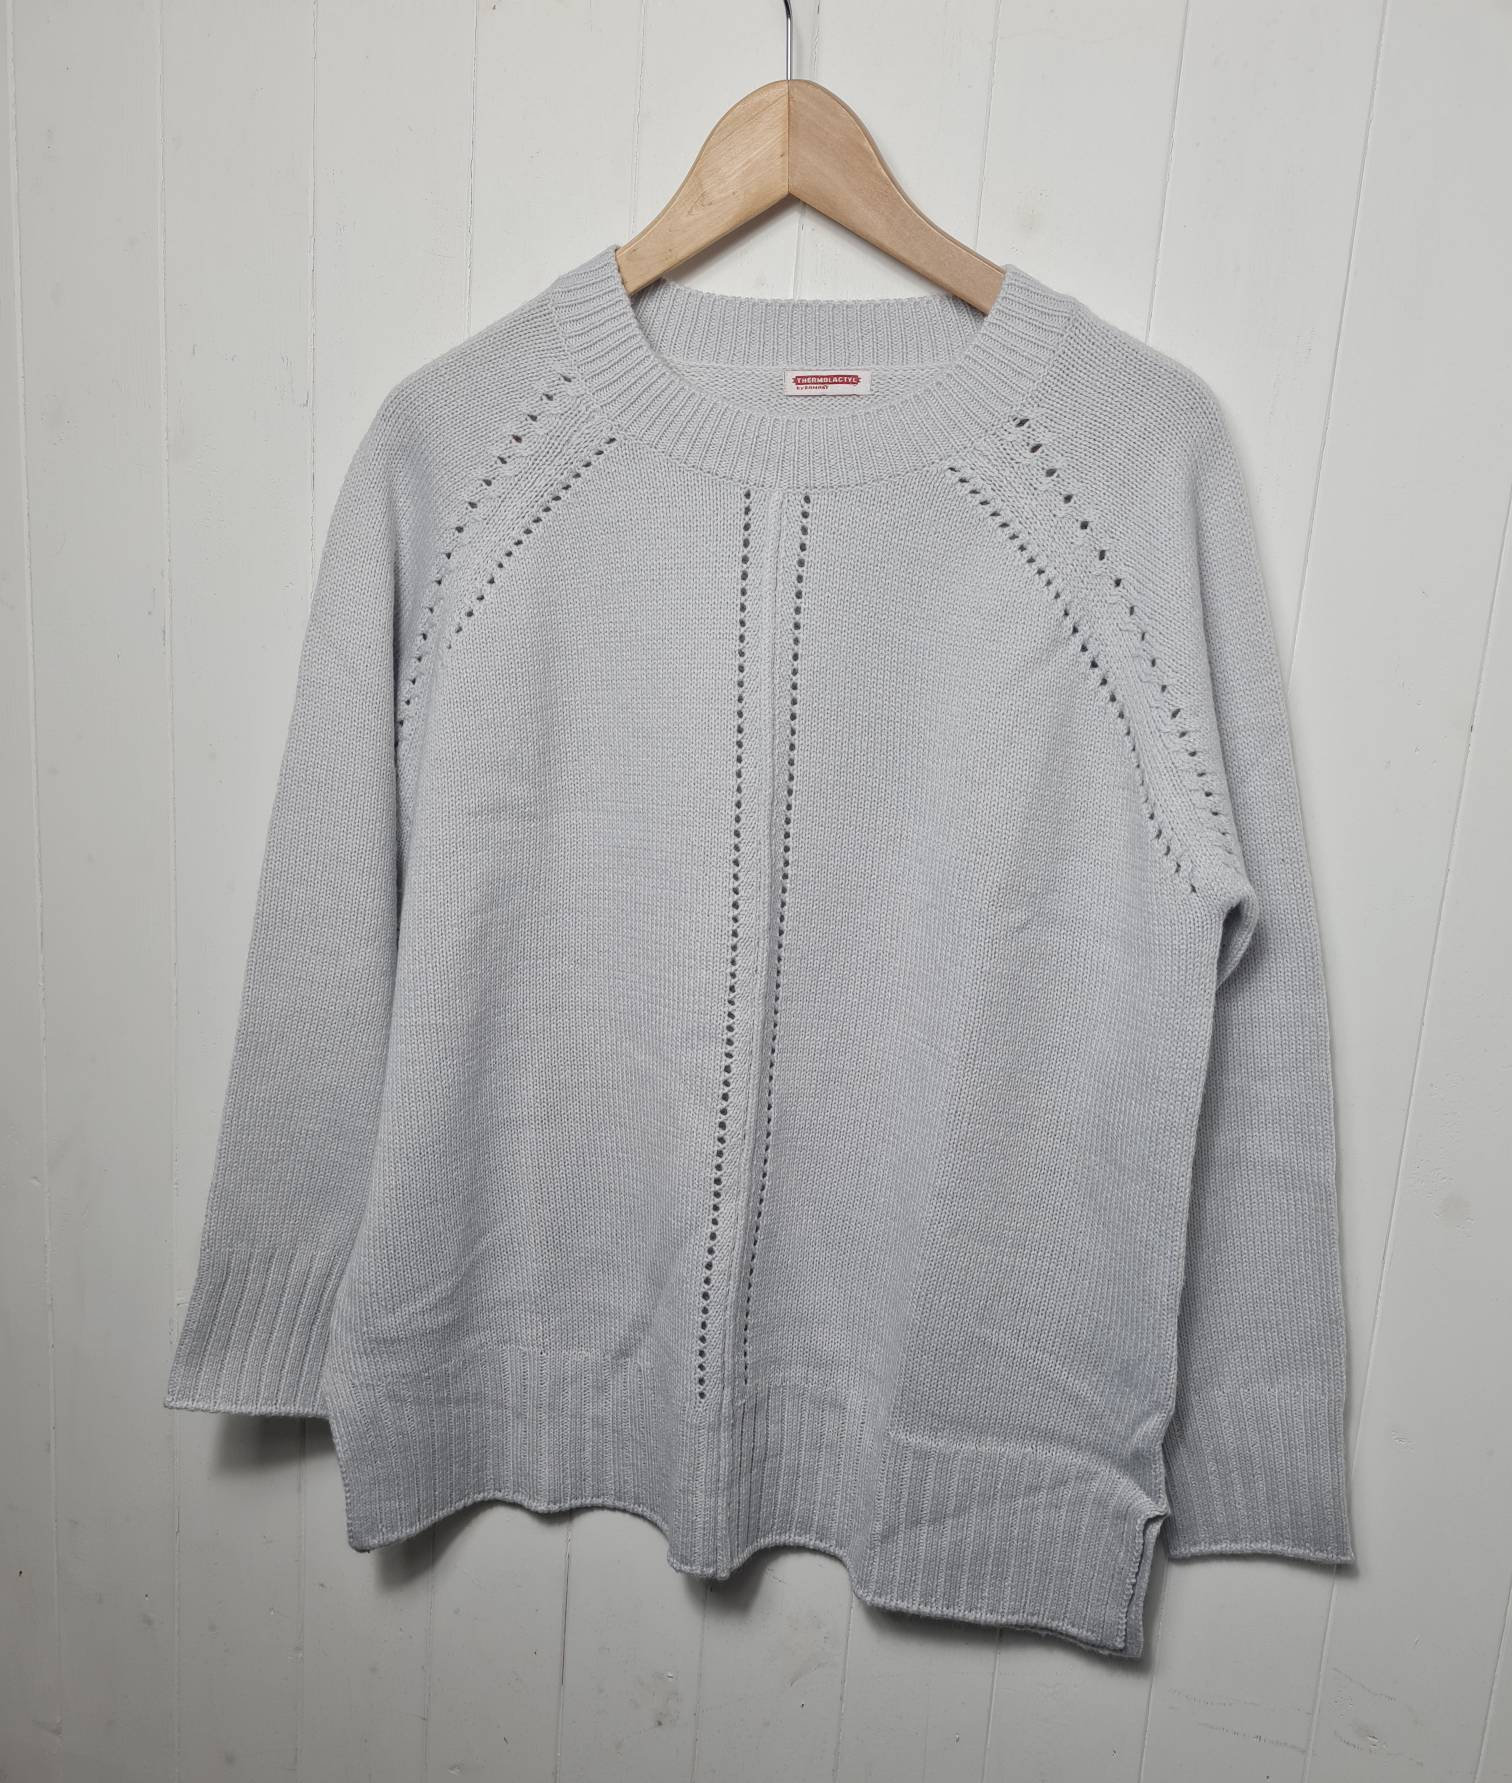 Buy Vintage Dove Grey Crew Neck Womens Jumper by Damart Knit Online in  India - Etsy